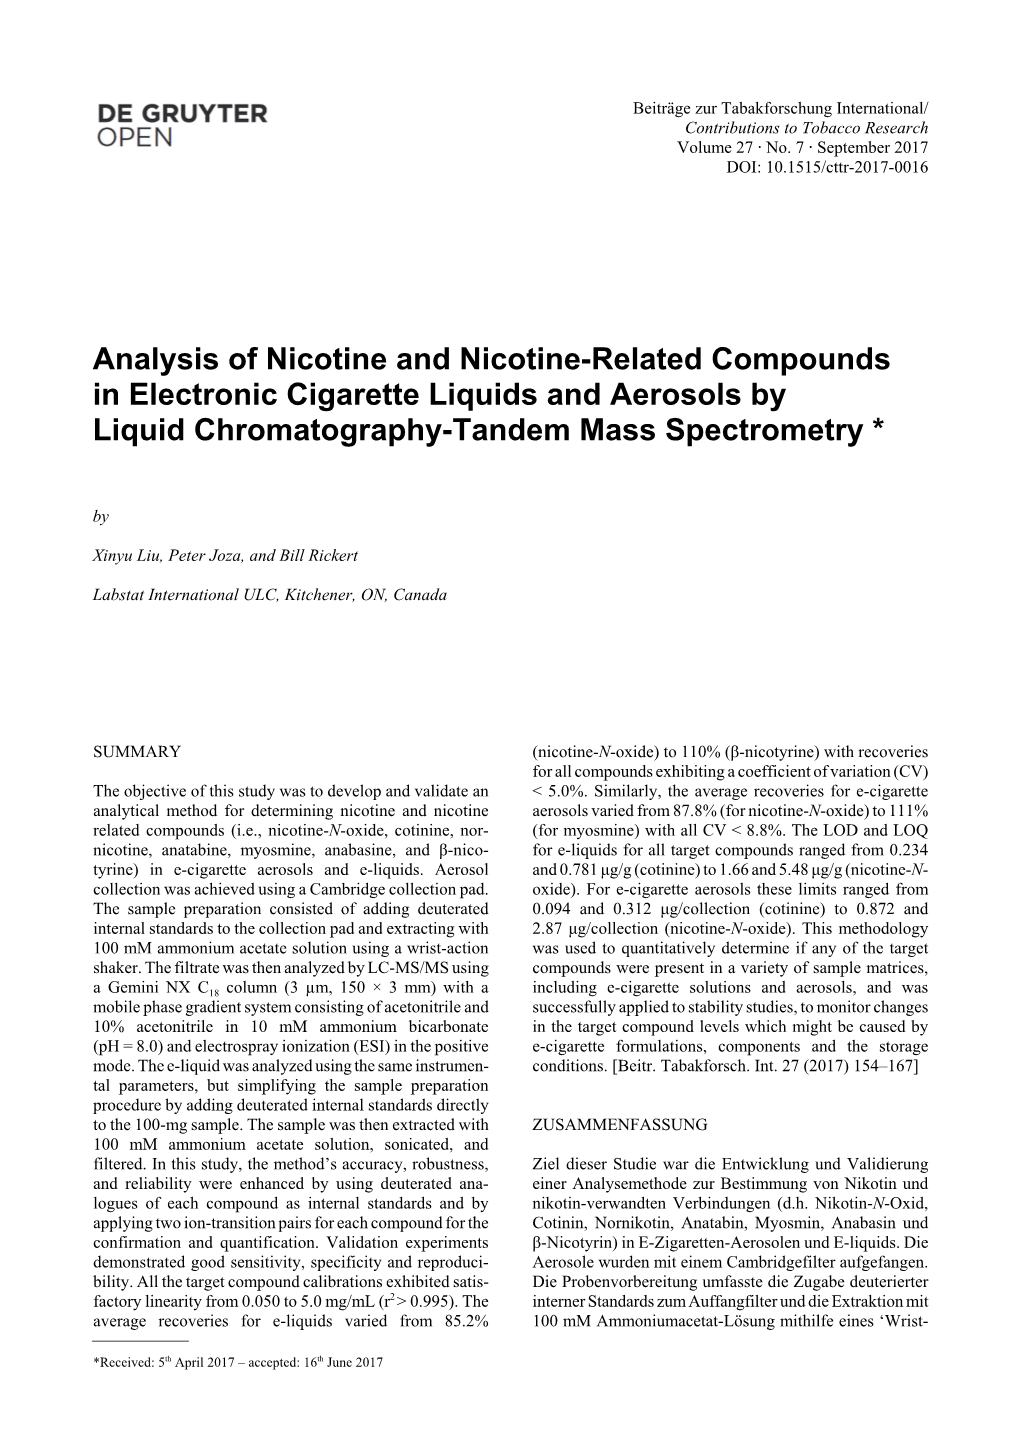 Analysis of Nicotine and Nicotine-Related Compounds in Electronic Cigarette Liquids and Aerosols by Liquid Chromatography-Tandem Mass Spectrometry *